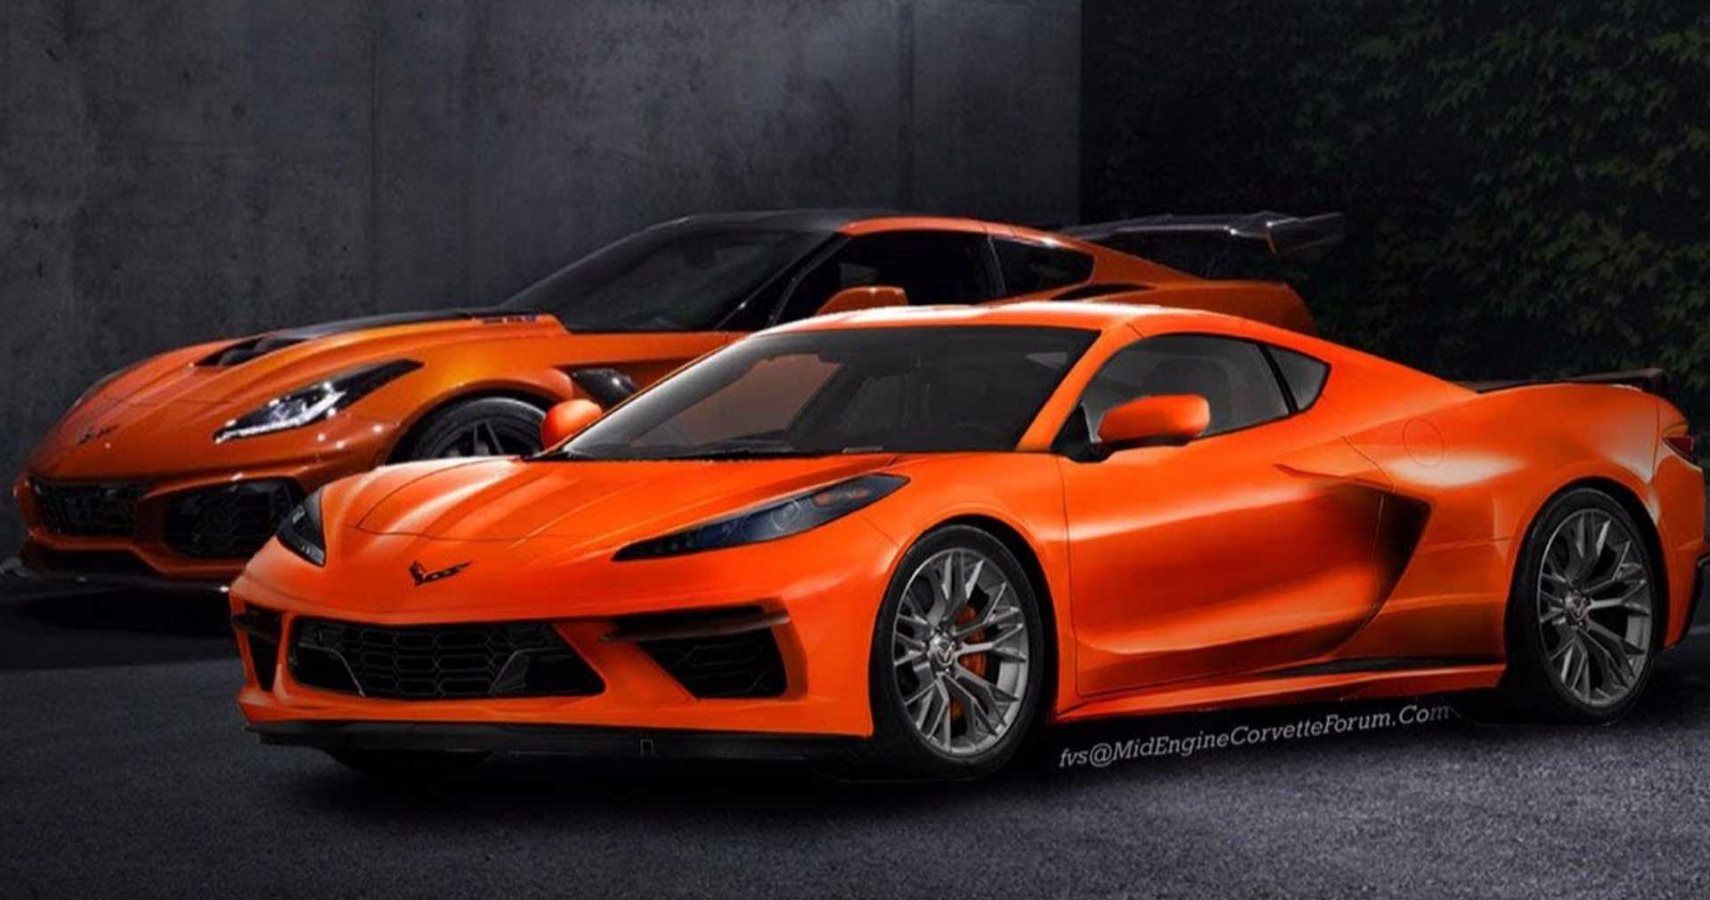 A Big Corvette Dealer Is Taking Deposits For Upcoming C8 Corvette Signalling Reveal May Be Imminent